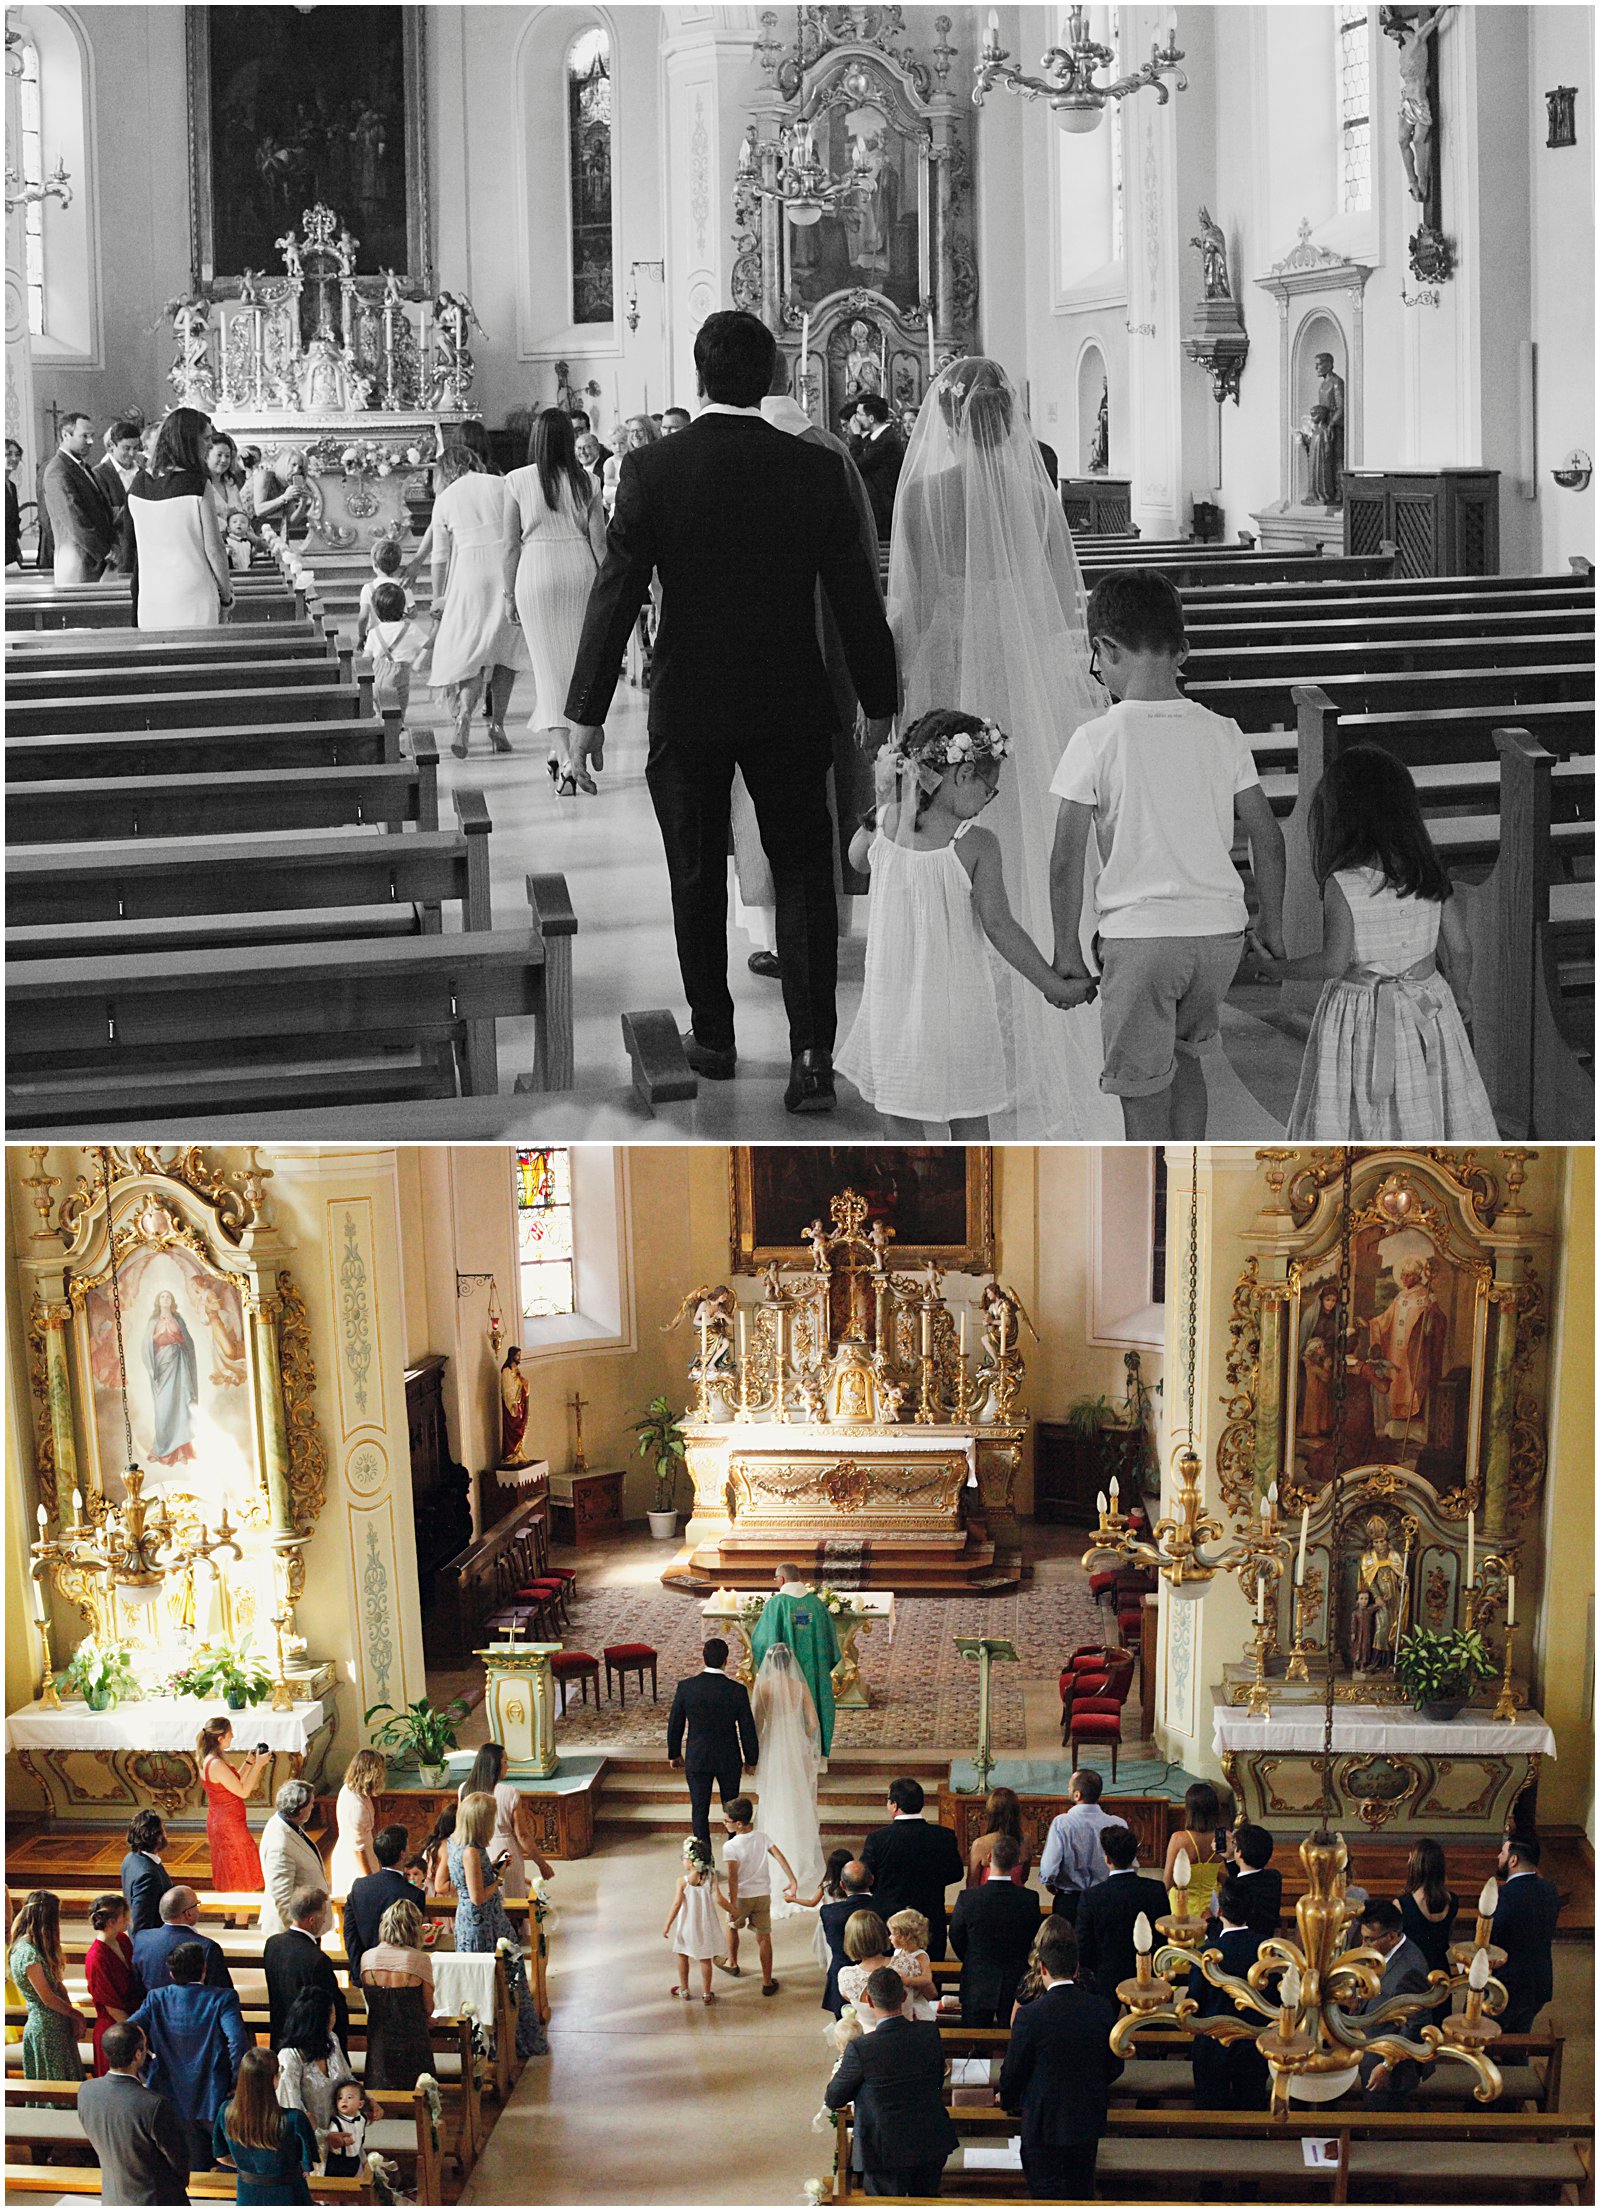 Wedding at Wattwiller Church Alsace France photographed by Helena Woods